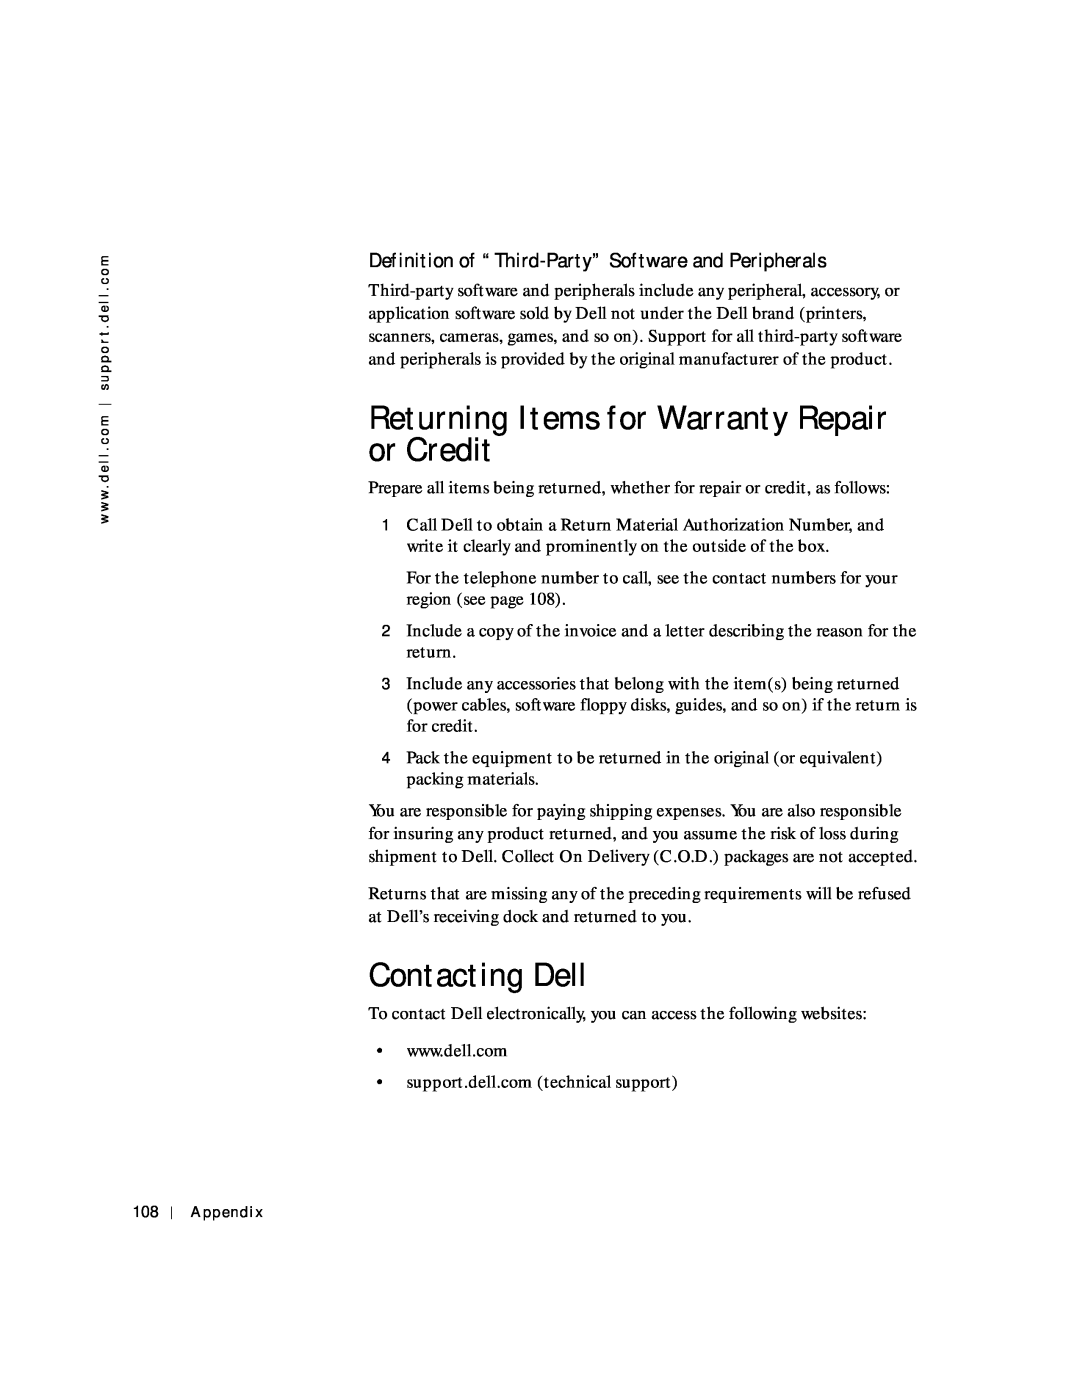 Dell 4150 owner manual Returning Items for Warranty Repair or Credit, Contacting Dell 